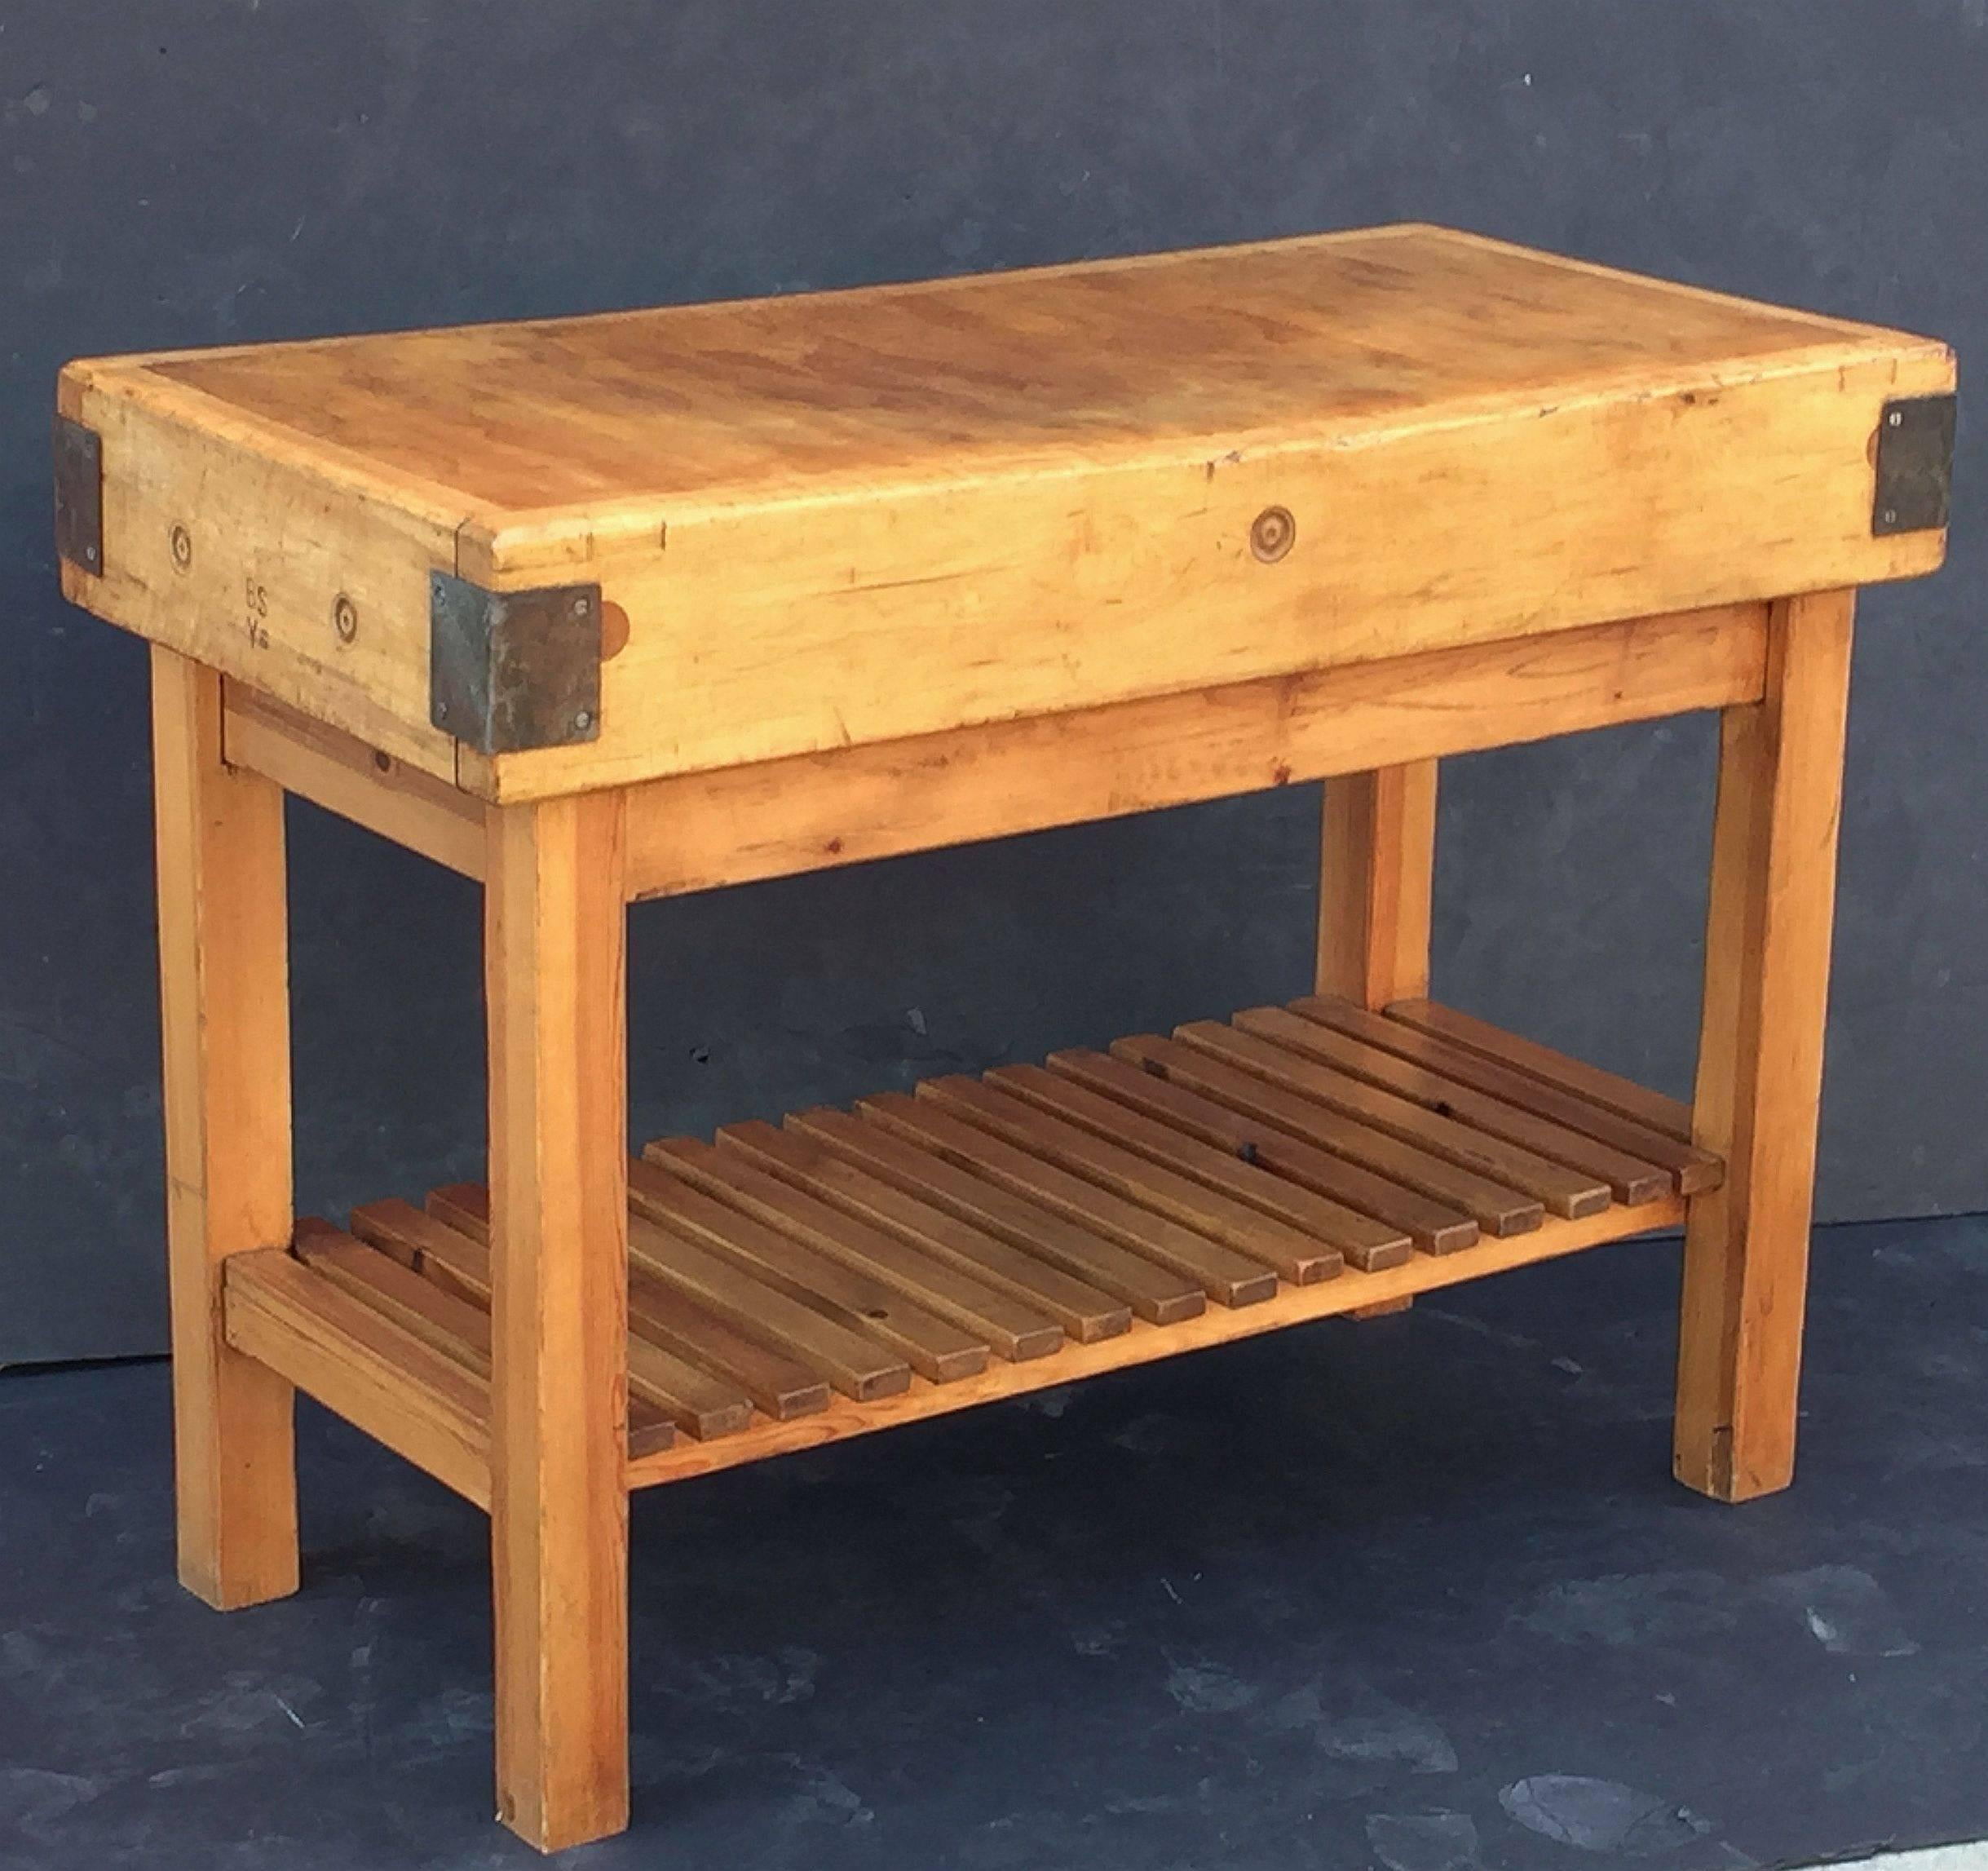 A handsome large French butcher's chopping block table, featuring a large, rectangular block or slab of iron-bound wood set upon a bottom tier four-legged, paneled support Stand of pine. Ships in two pieces.

Makes a great kitchen island or